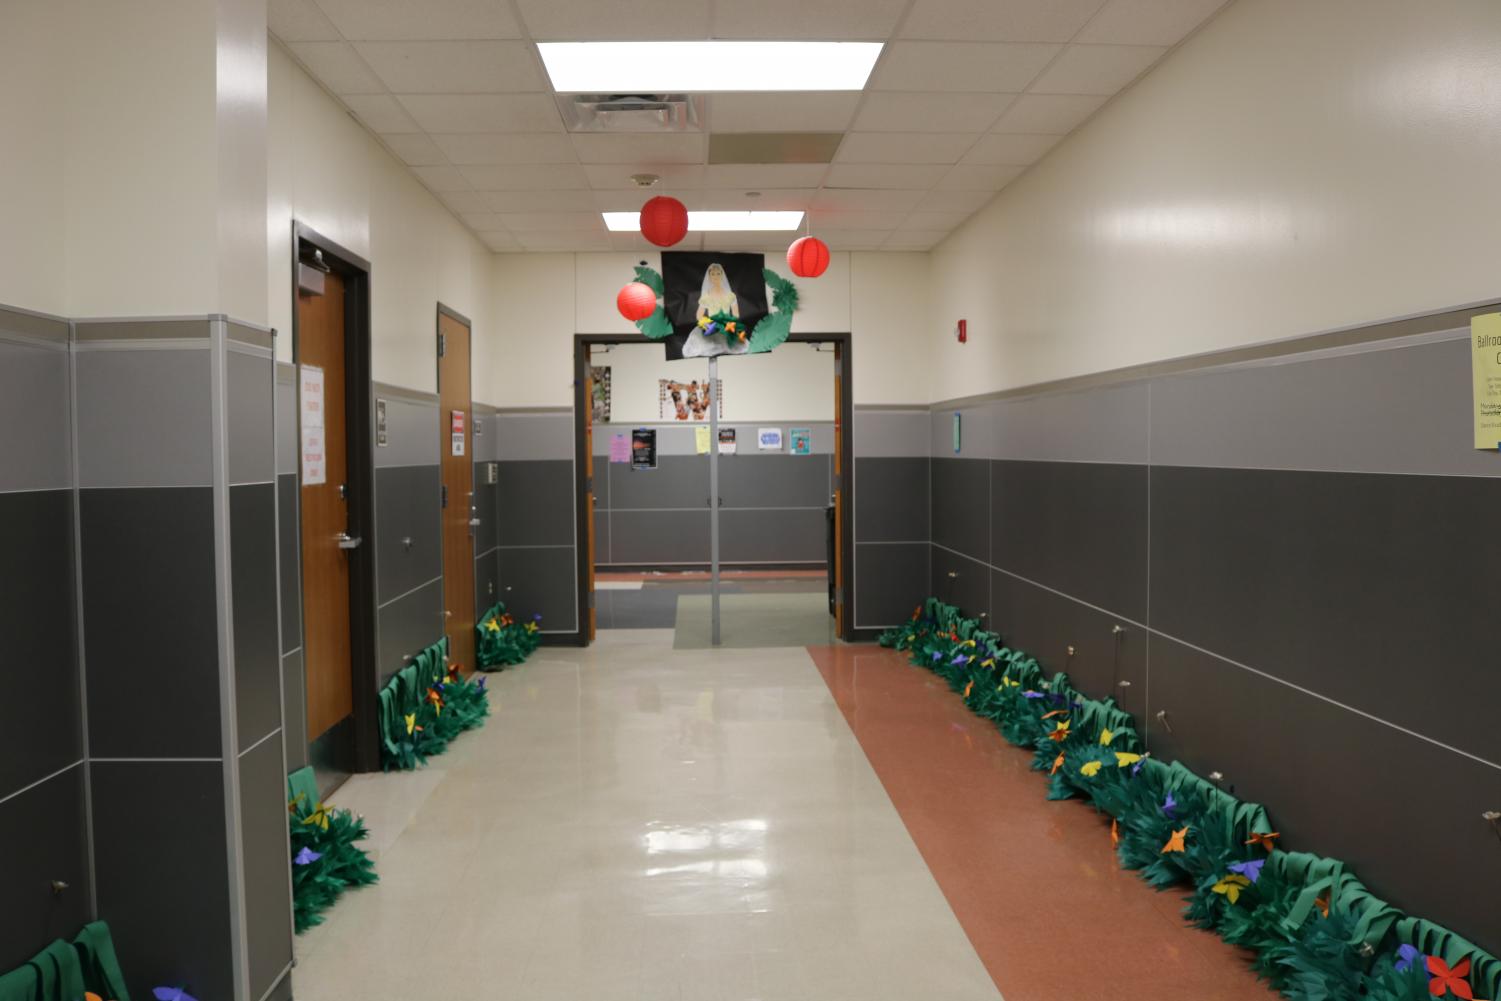 Student+Organizations+Decorate+Hallways+for+Homecoming